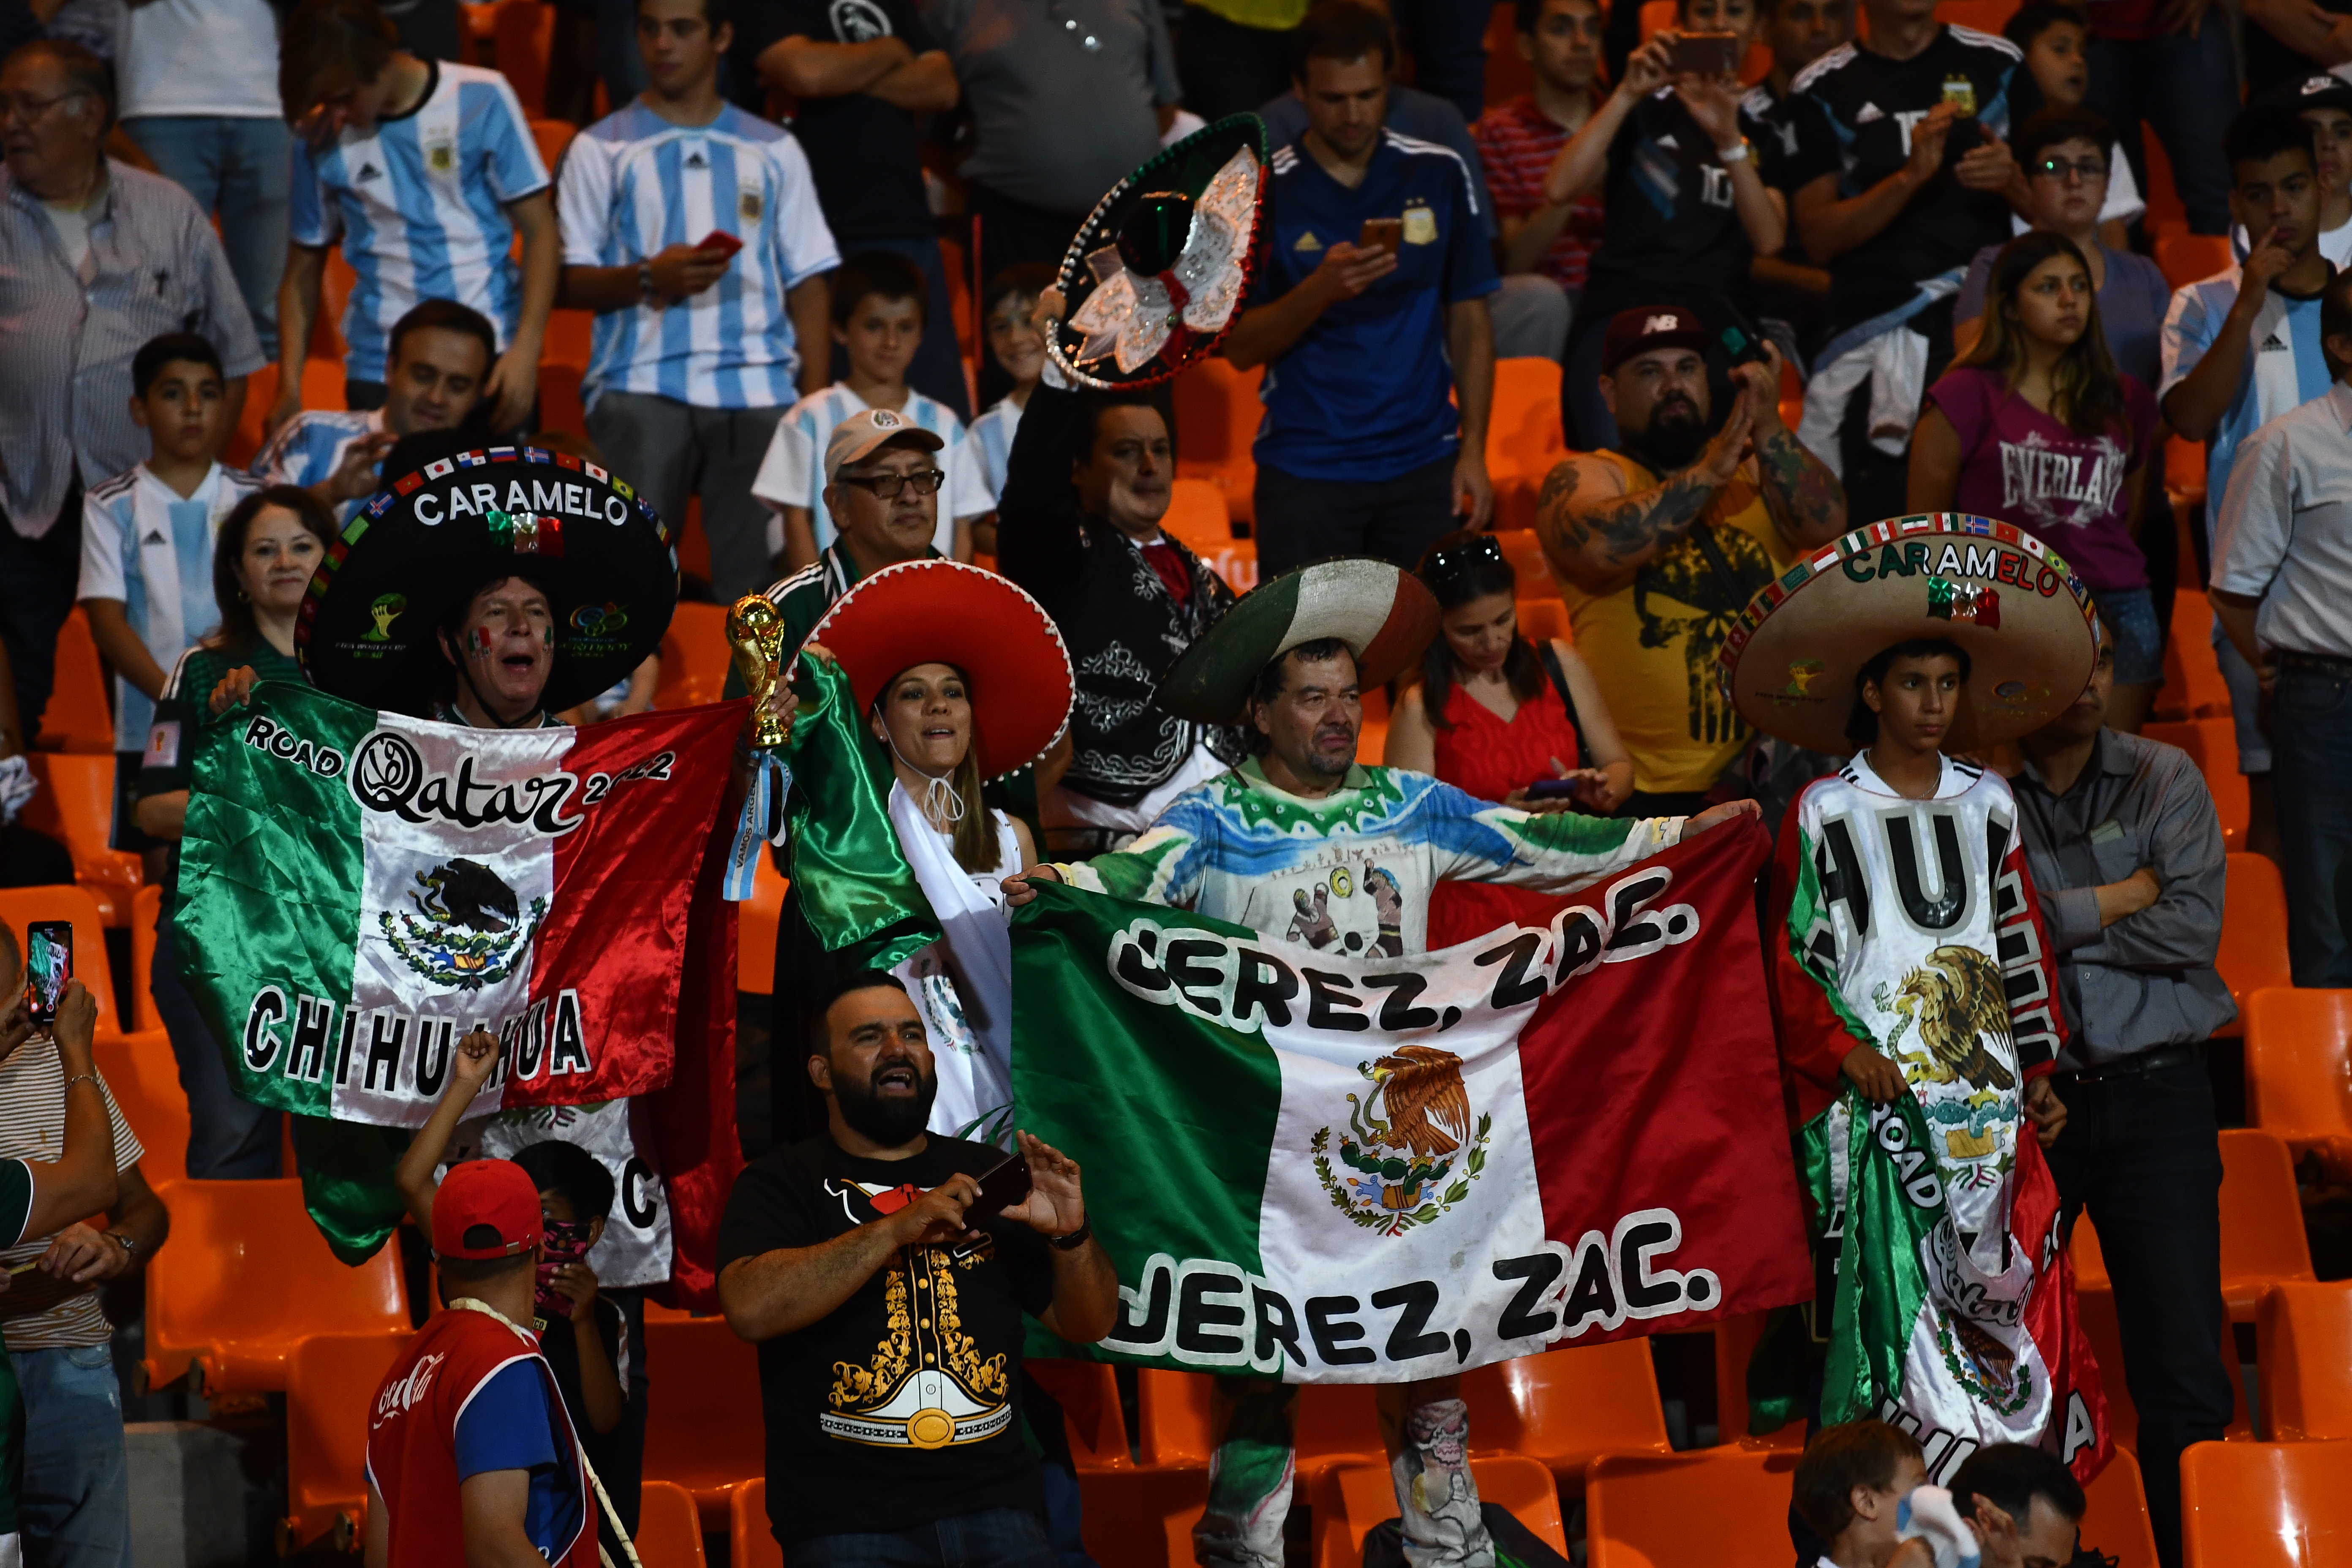 MENDOZA, ARGENTINA - NOVEMBER 20: Fans of Mexico cheer for their team during a friendly match between Argentina and Mexico at Malvinas Argentinas Stadium on November 20, 2018 in Mendoza, Argentina. (Photo by Amilcar Orfali/Getty Images)